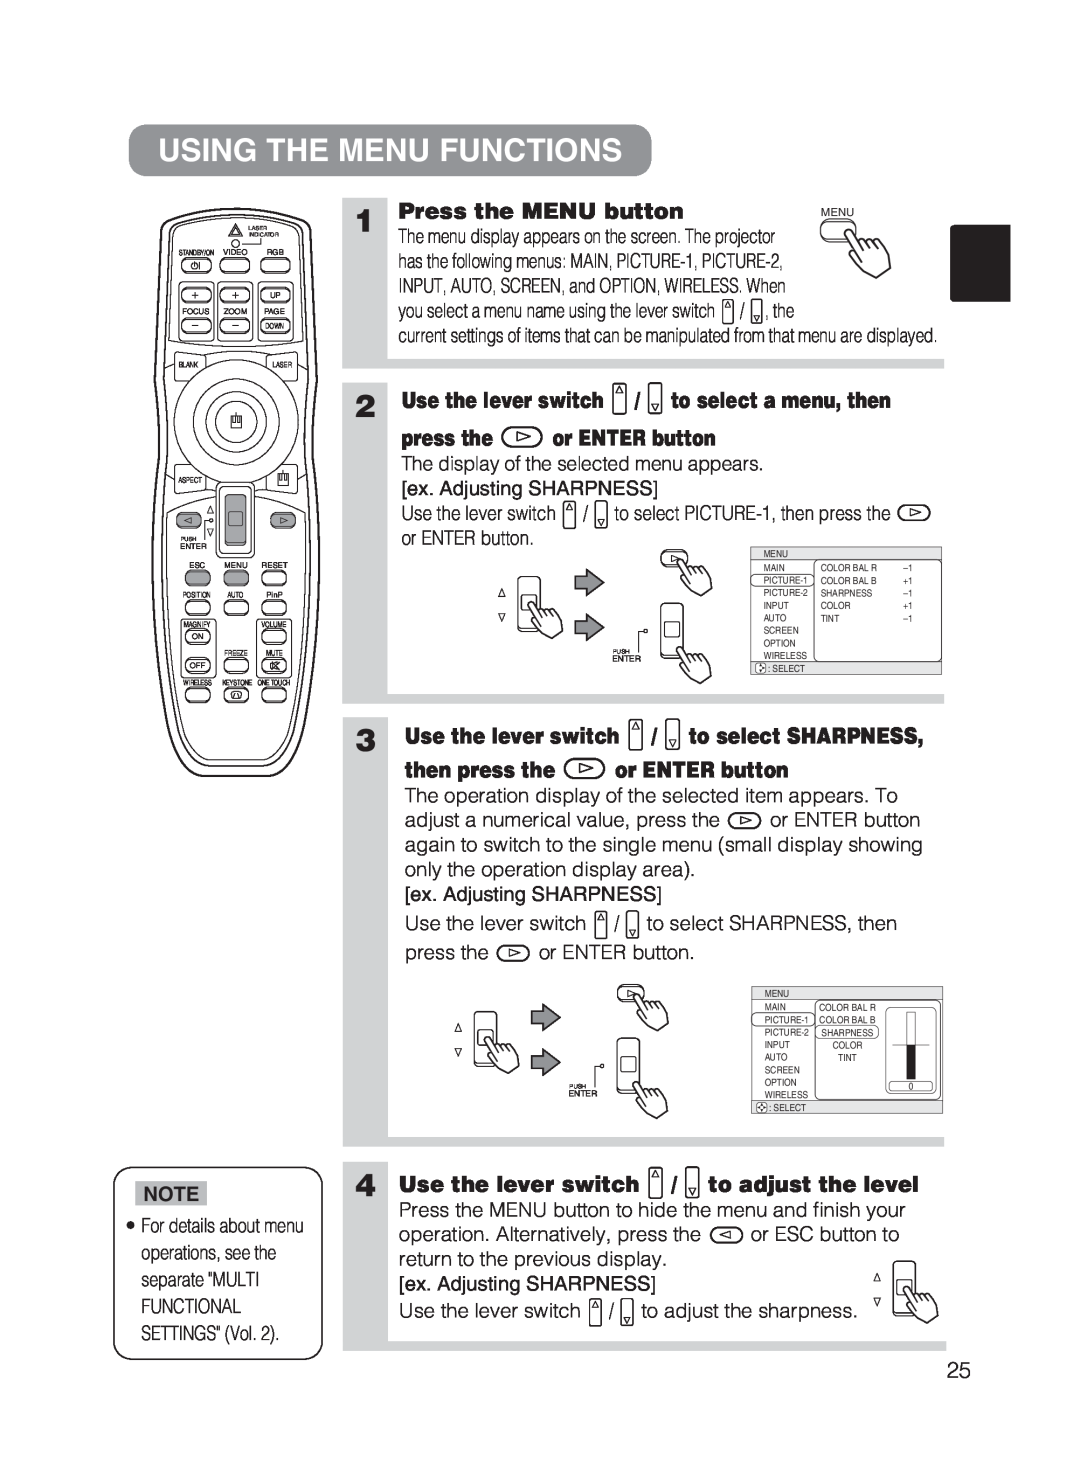 Hitachi CP-X870 user manual Using The Menu Functions, Press the MENU button, Use the lever switch / to select a menu, then 